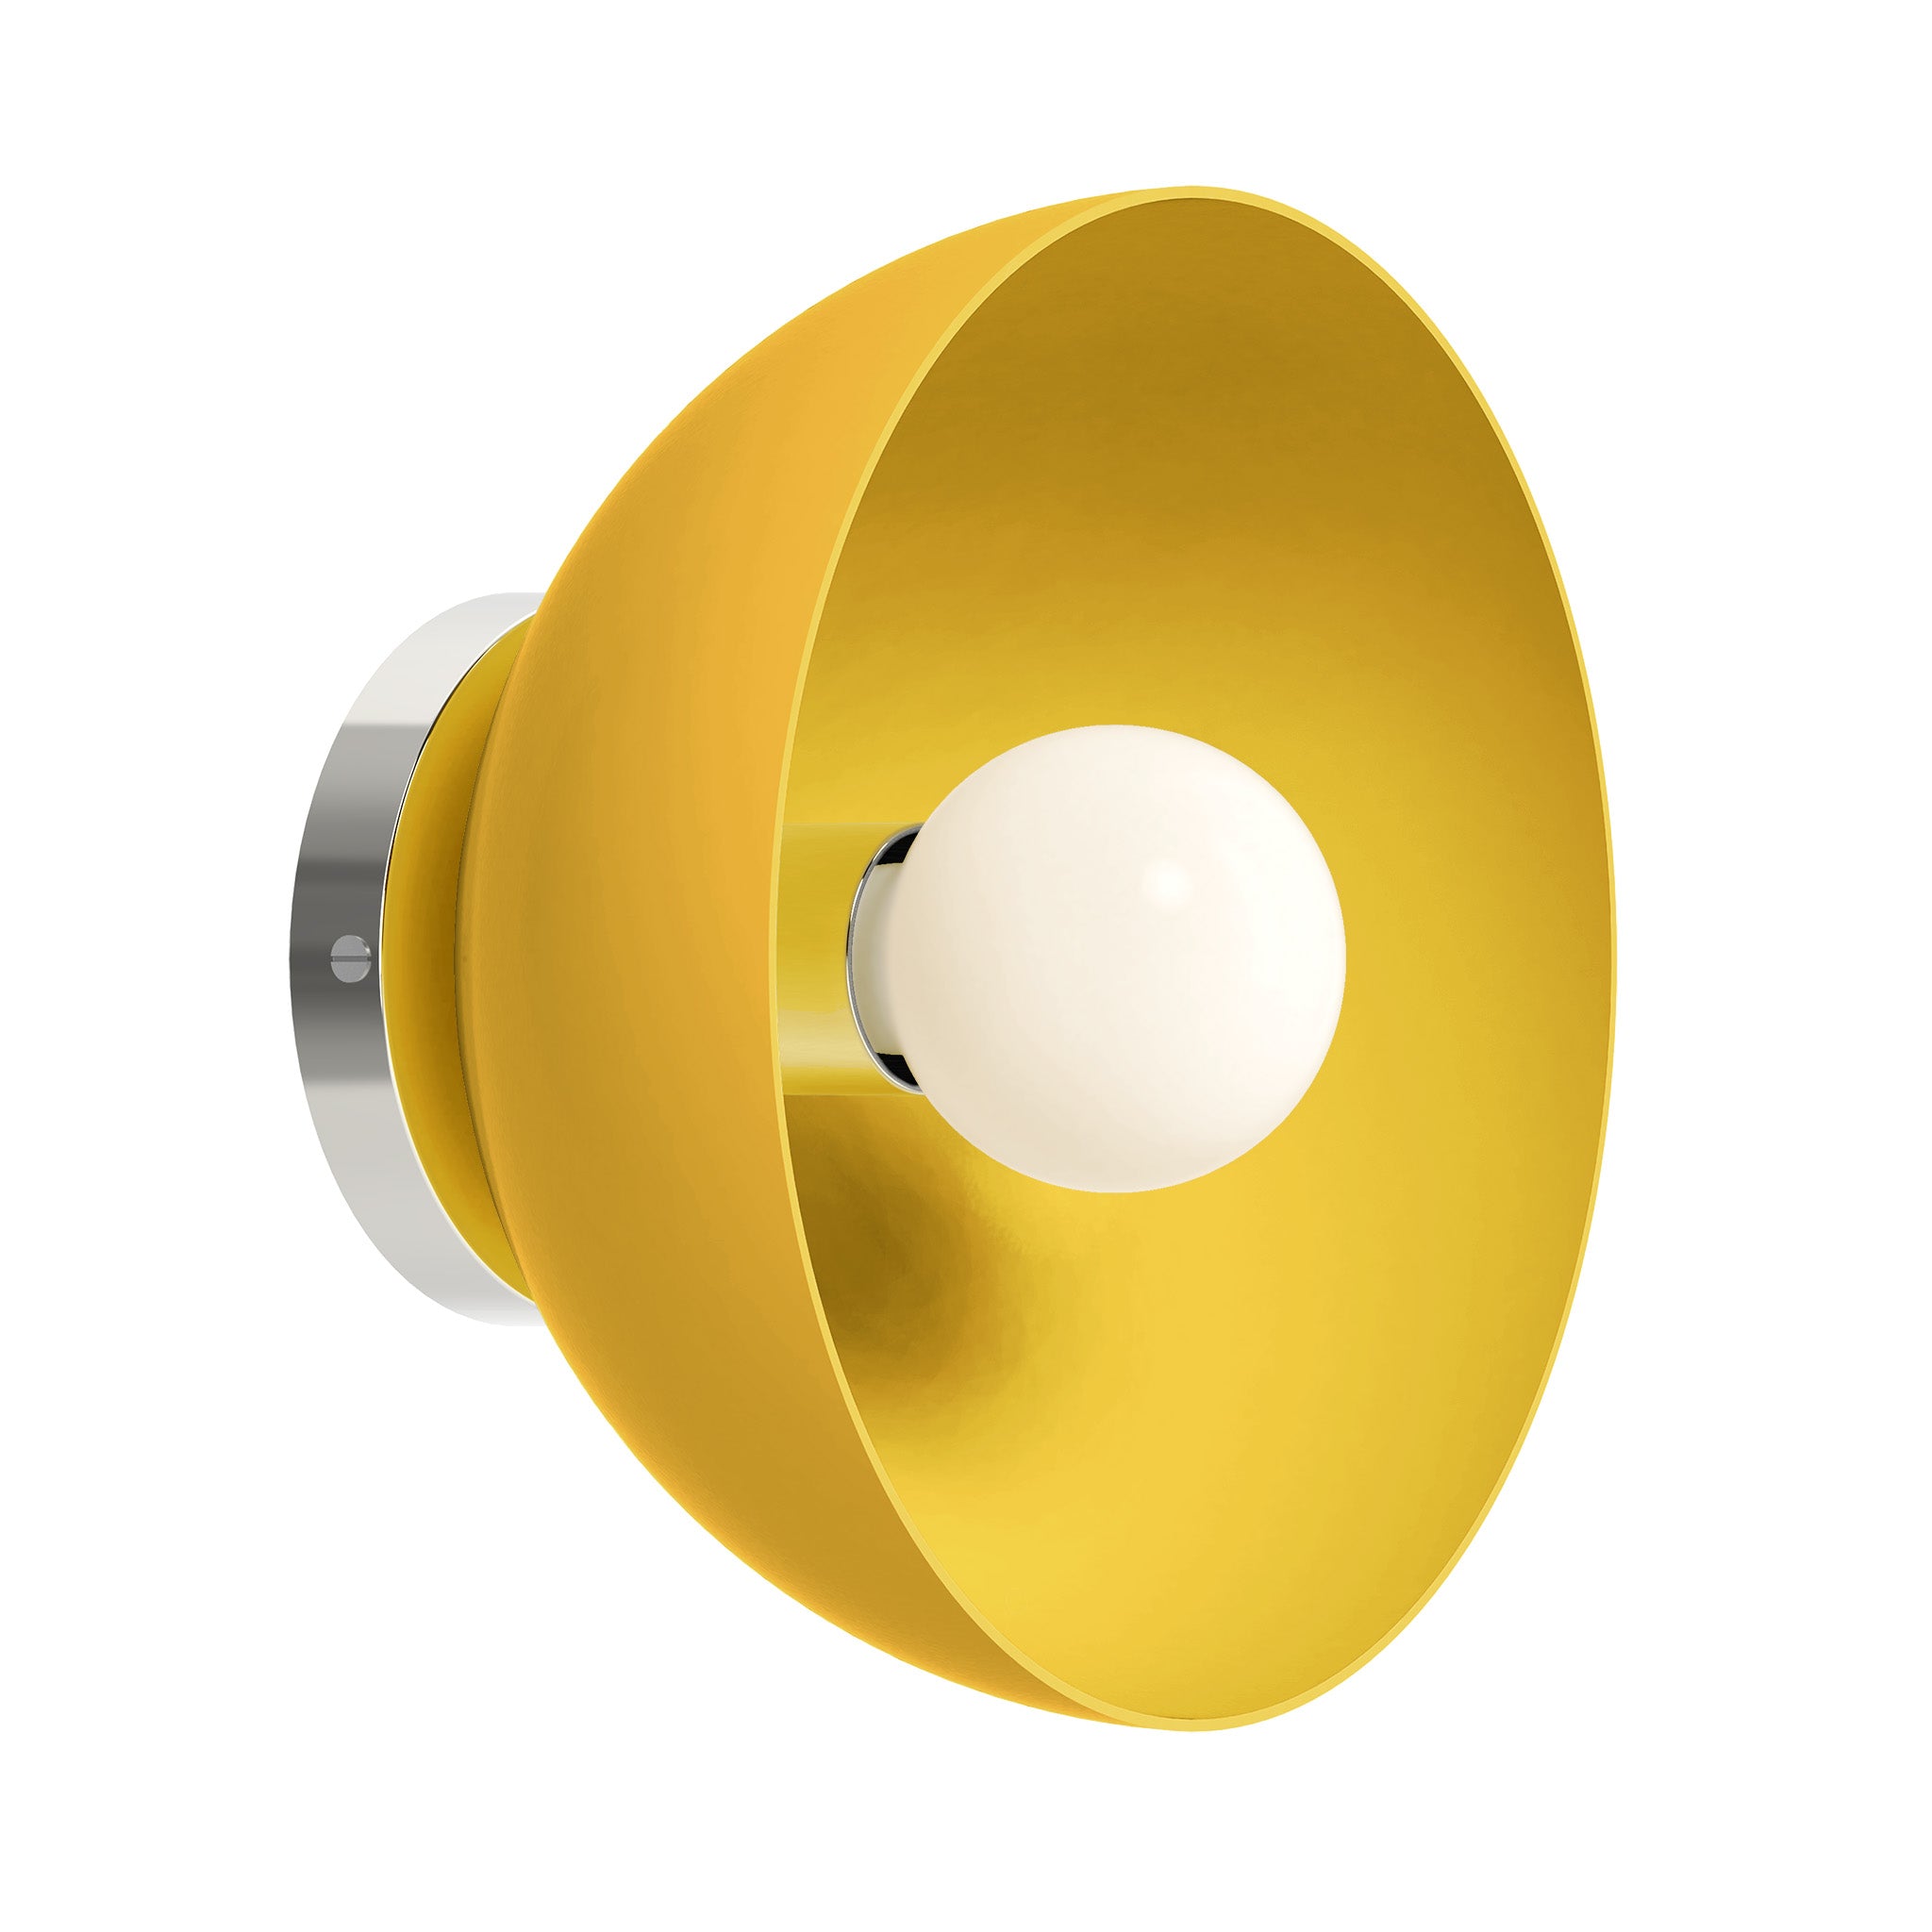 Nickel and ochre color hemi dome sconce 10" Dutton Brown lighting